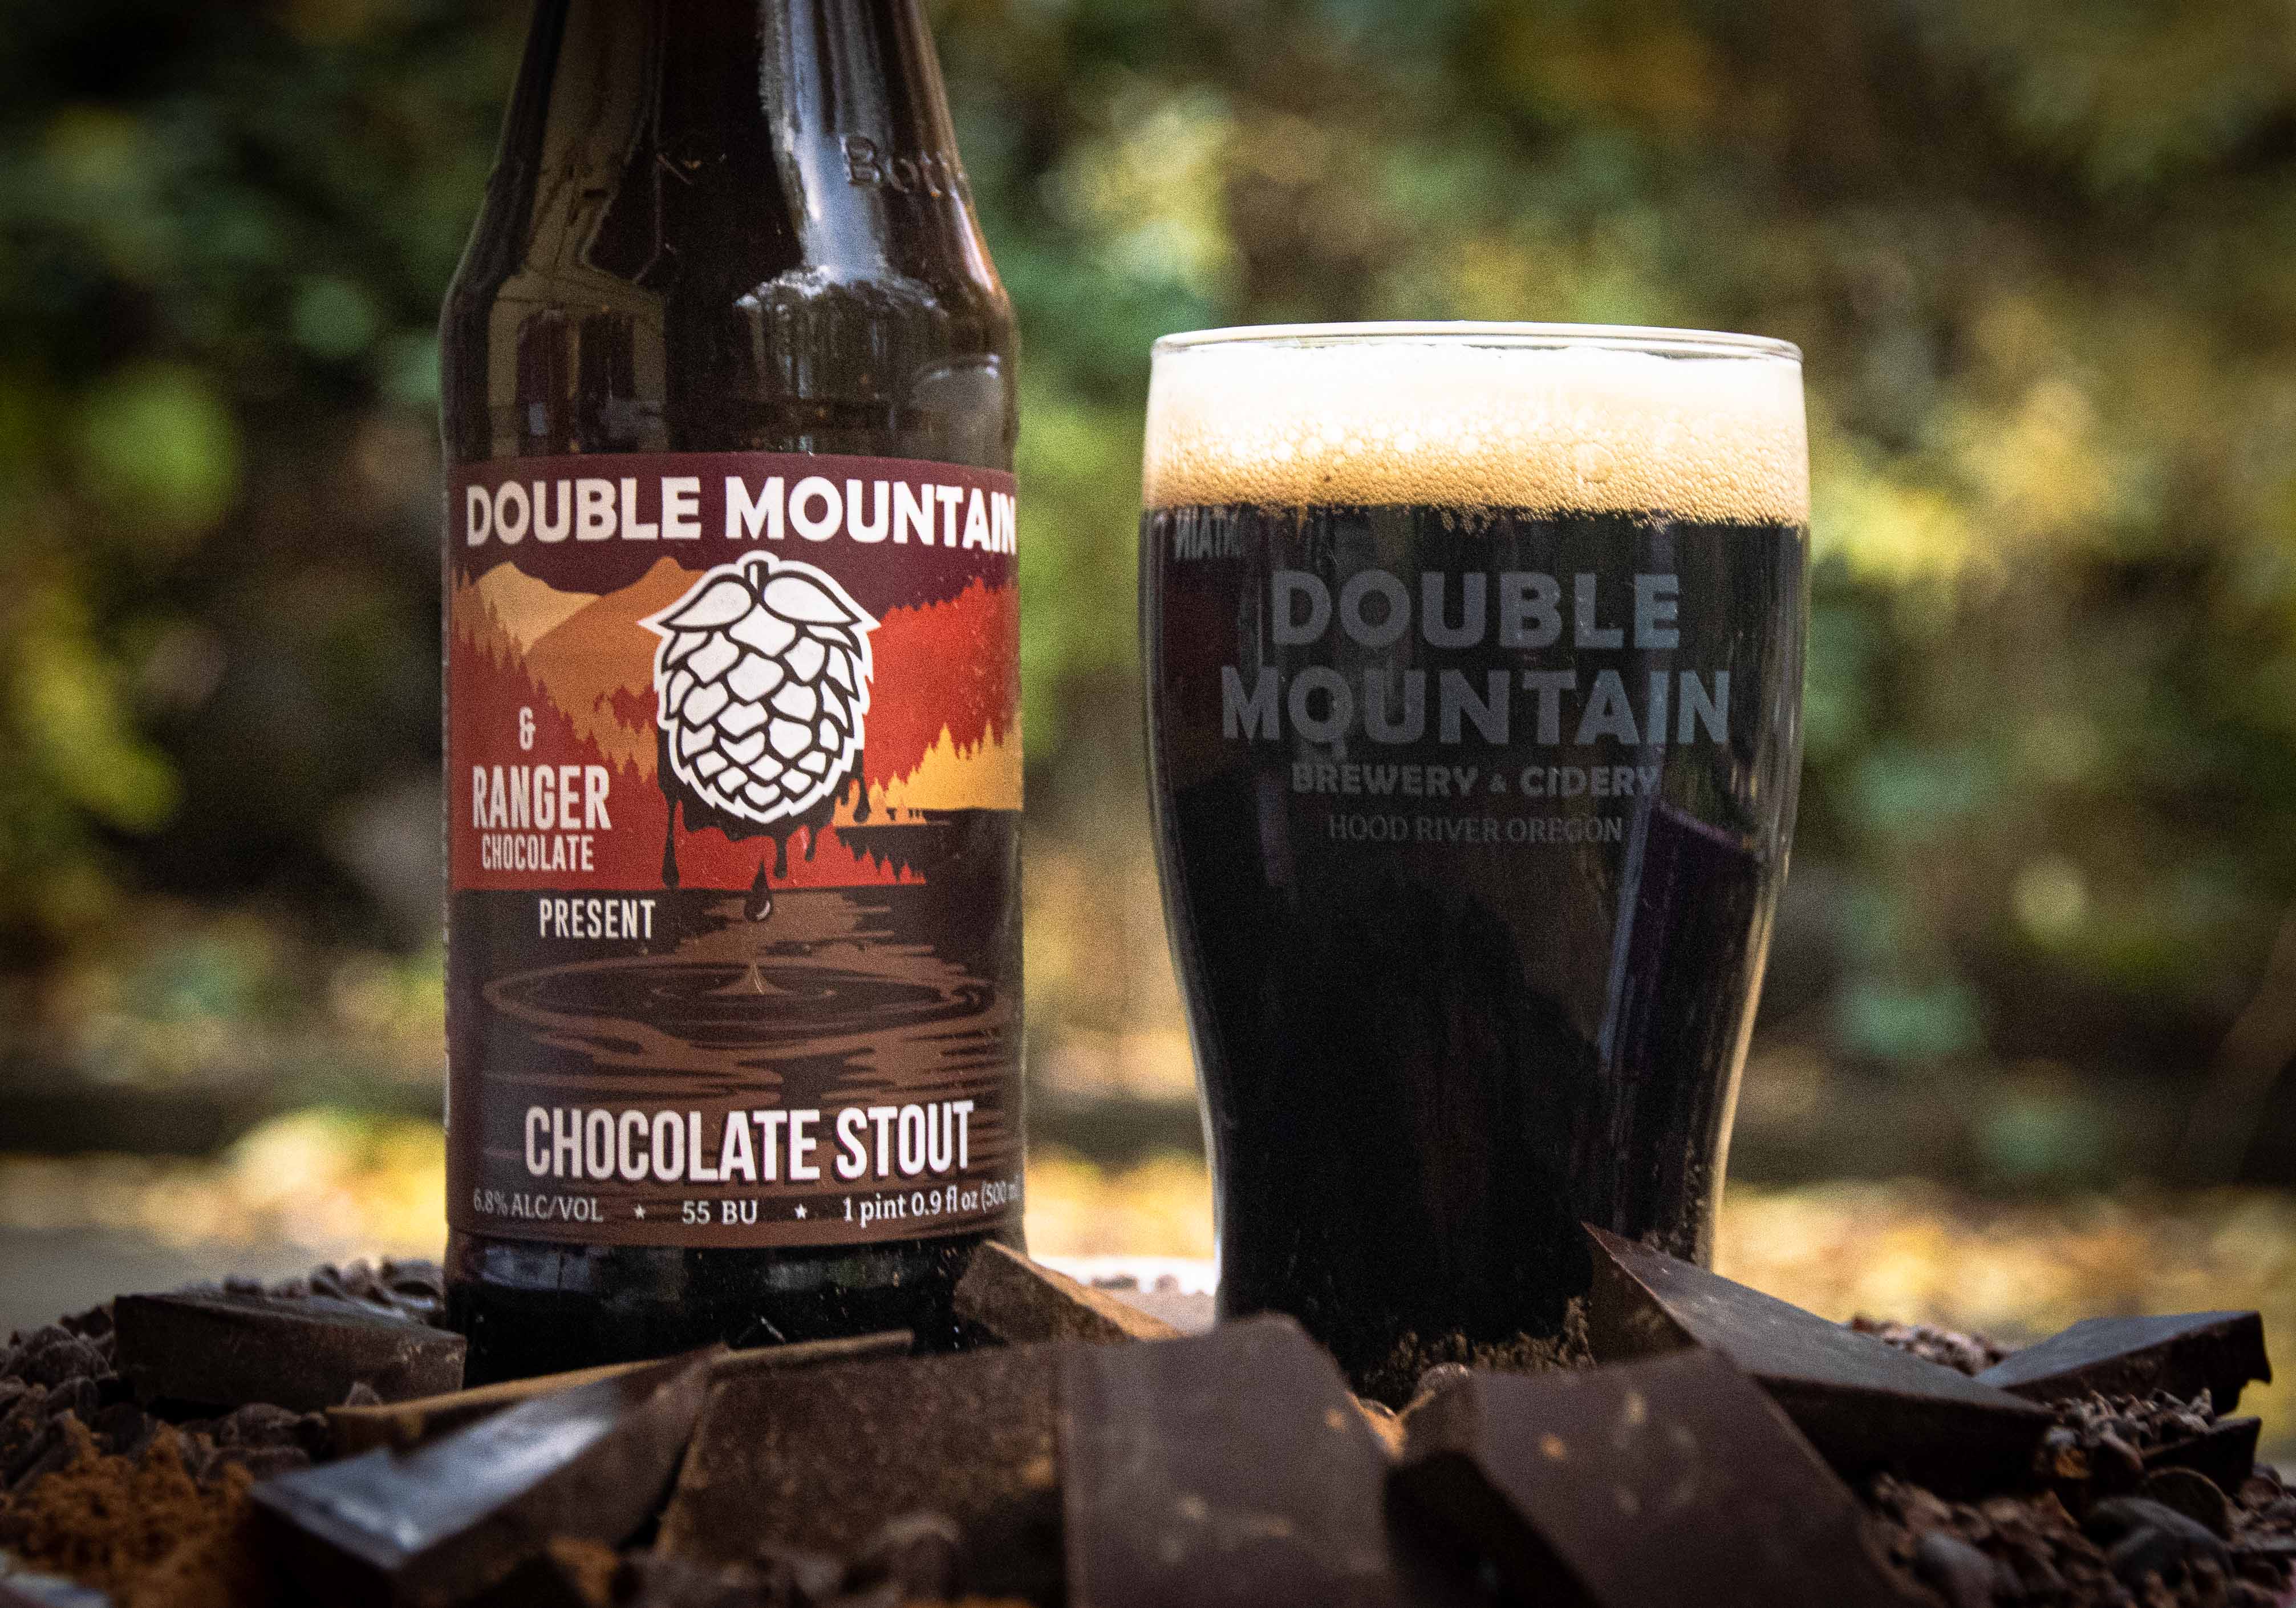 image of Chocolate Stout, a collaboration with Ranger Chocolate courtesy of Double Mountain Brewery